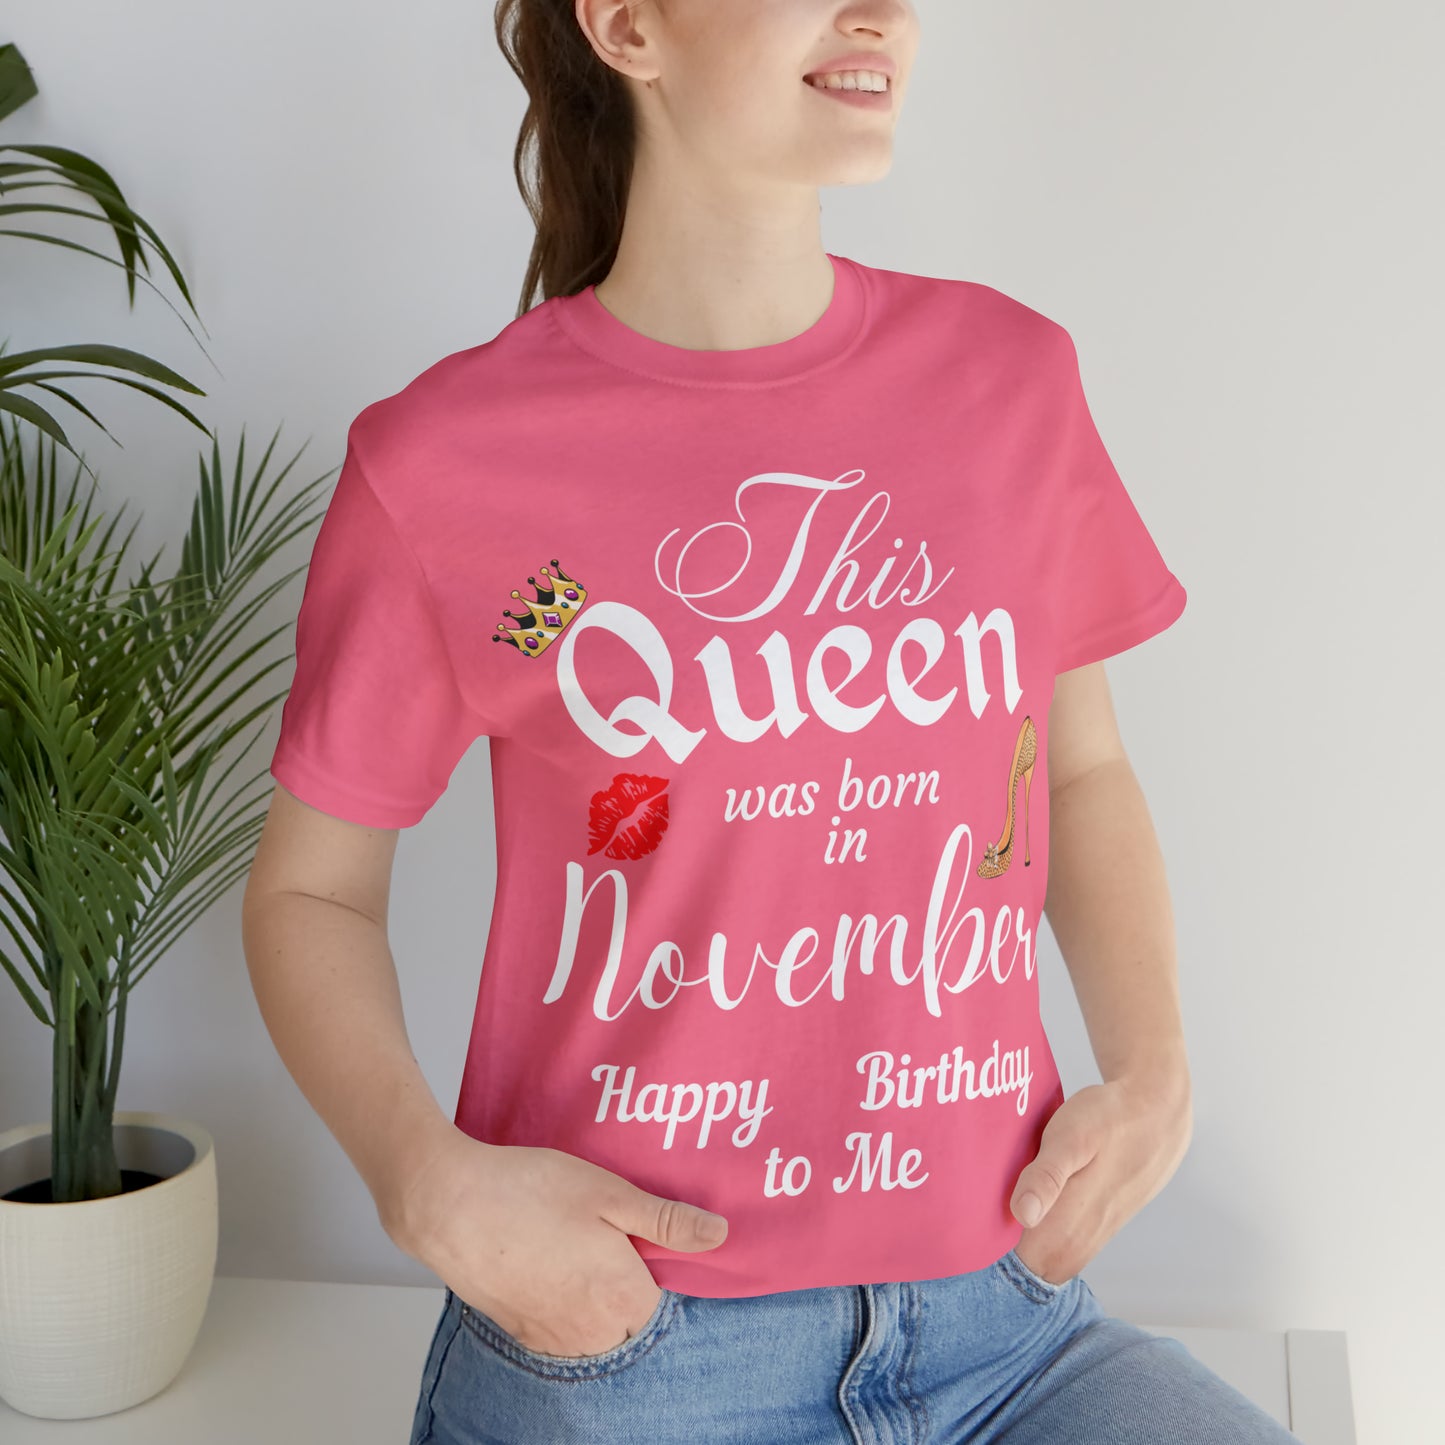 Birthday Queen Shirt, Gift for Birthday, This Queen was born in November Shirt, Funny Queen Shirt, Funny Birthday Shirt, Birthday Gift